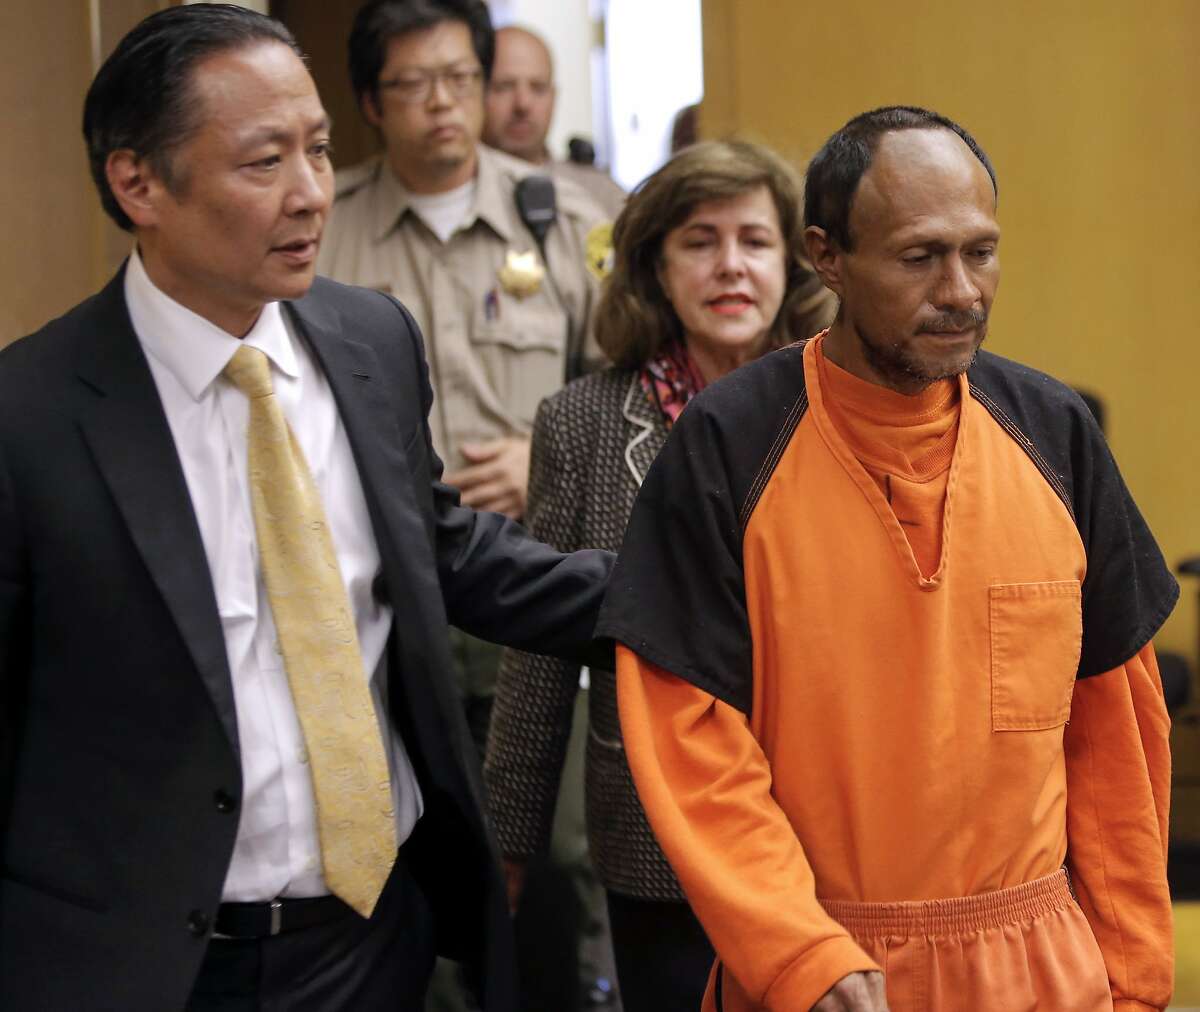 San Francisco Public Defender Jeff Adachi, (left) leads Juan Francisco Lopez-Sanchez, into the Hall of Justice in San Francisco, Calif. on Tues. July 7, 2015, for his arraignment on suspicion of murder in the shooting death of Kate Steinle on San Francisco's Pier 14 last Wednesday.